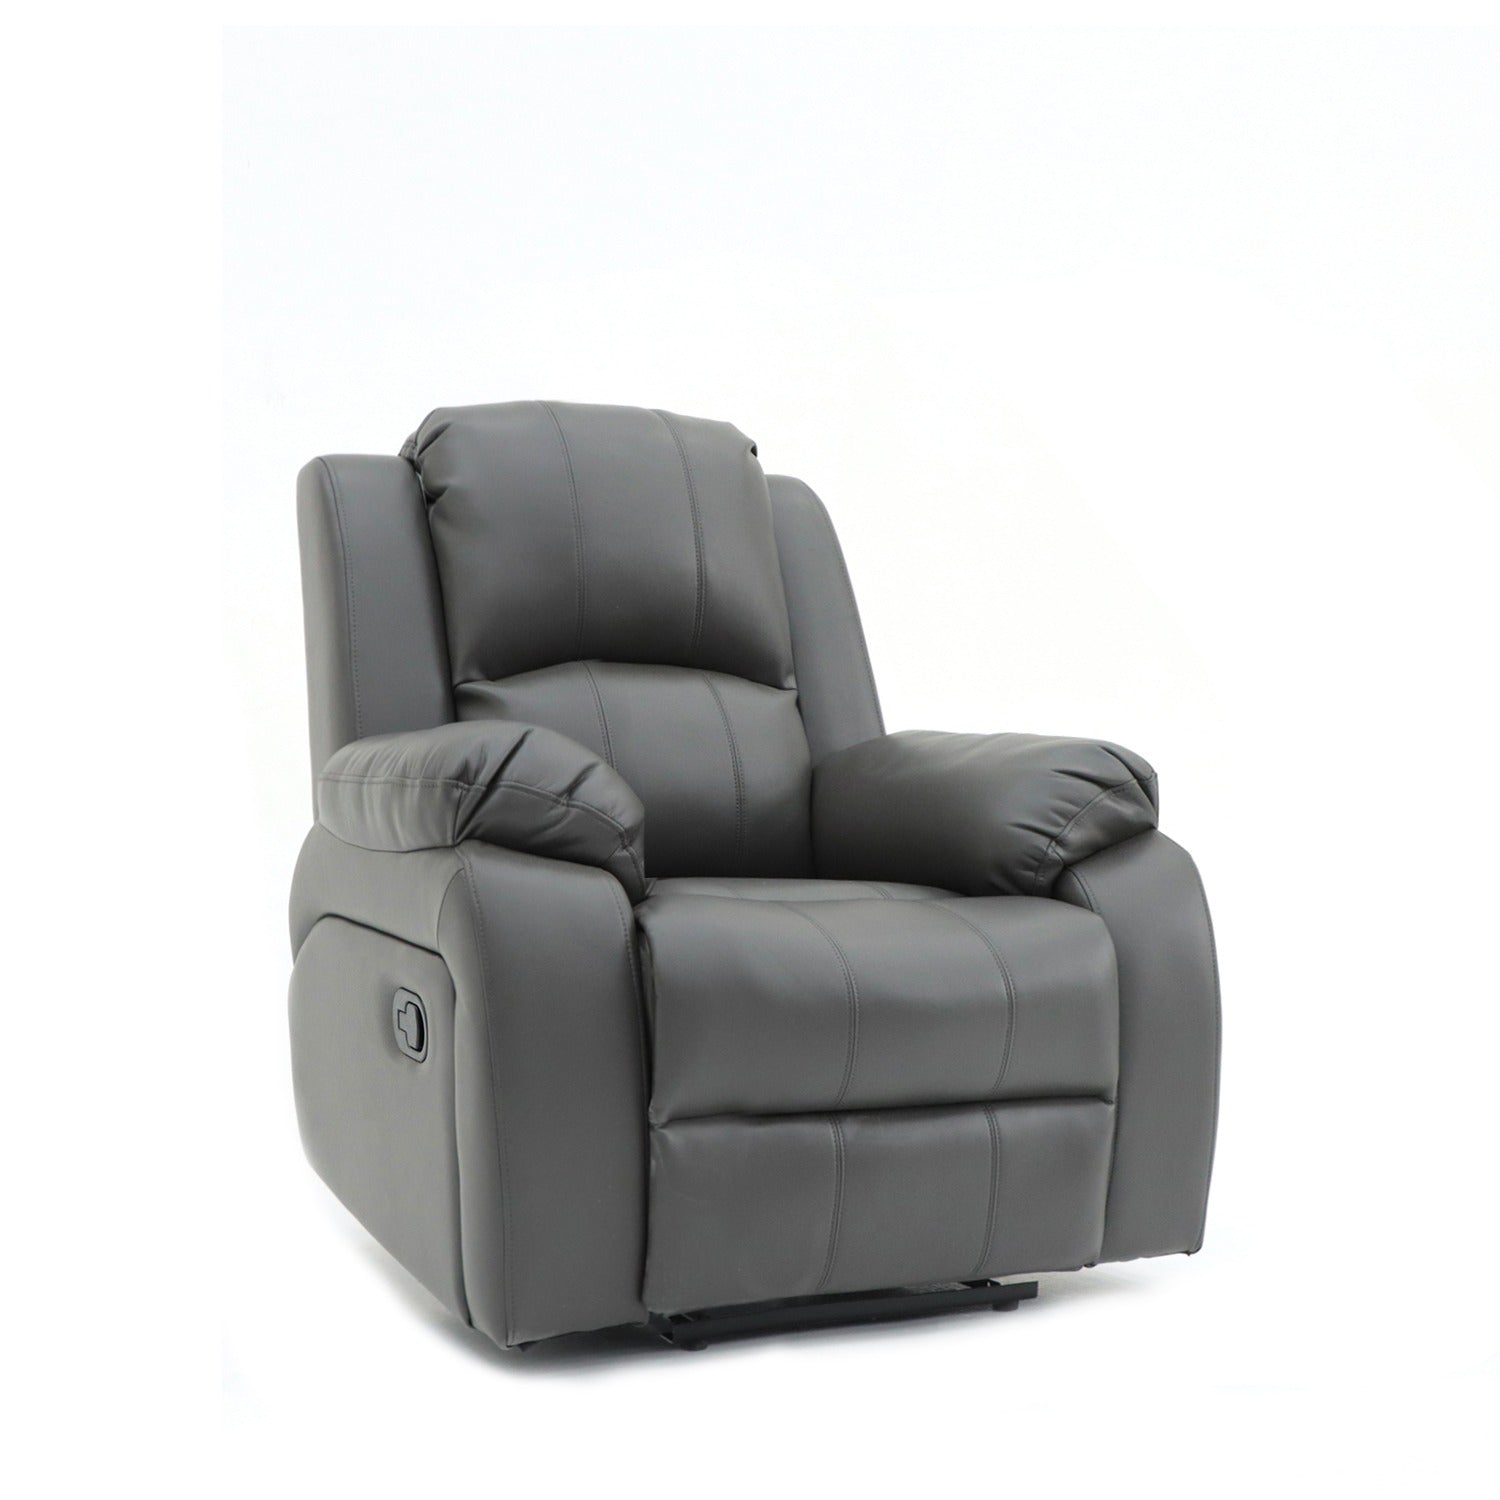 Darwin 3 Seater and 2 Chairs Power Recliner Grey Leather